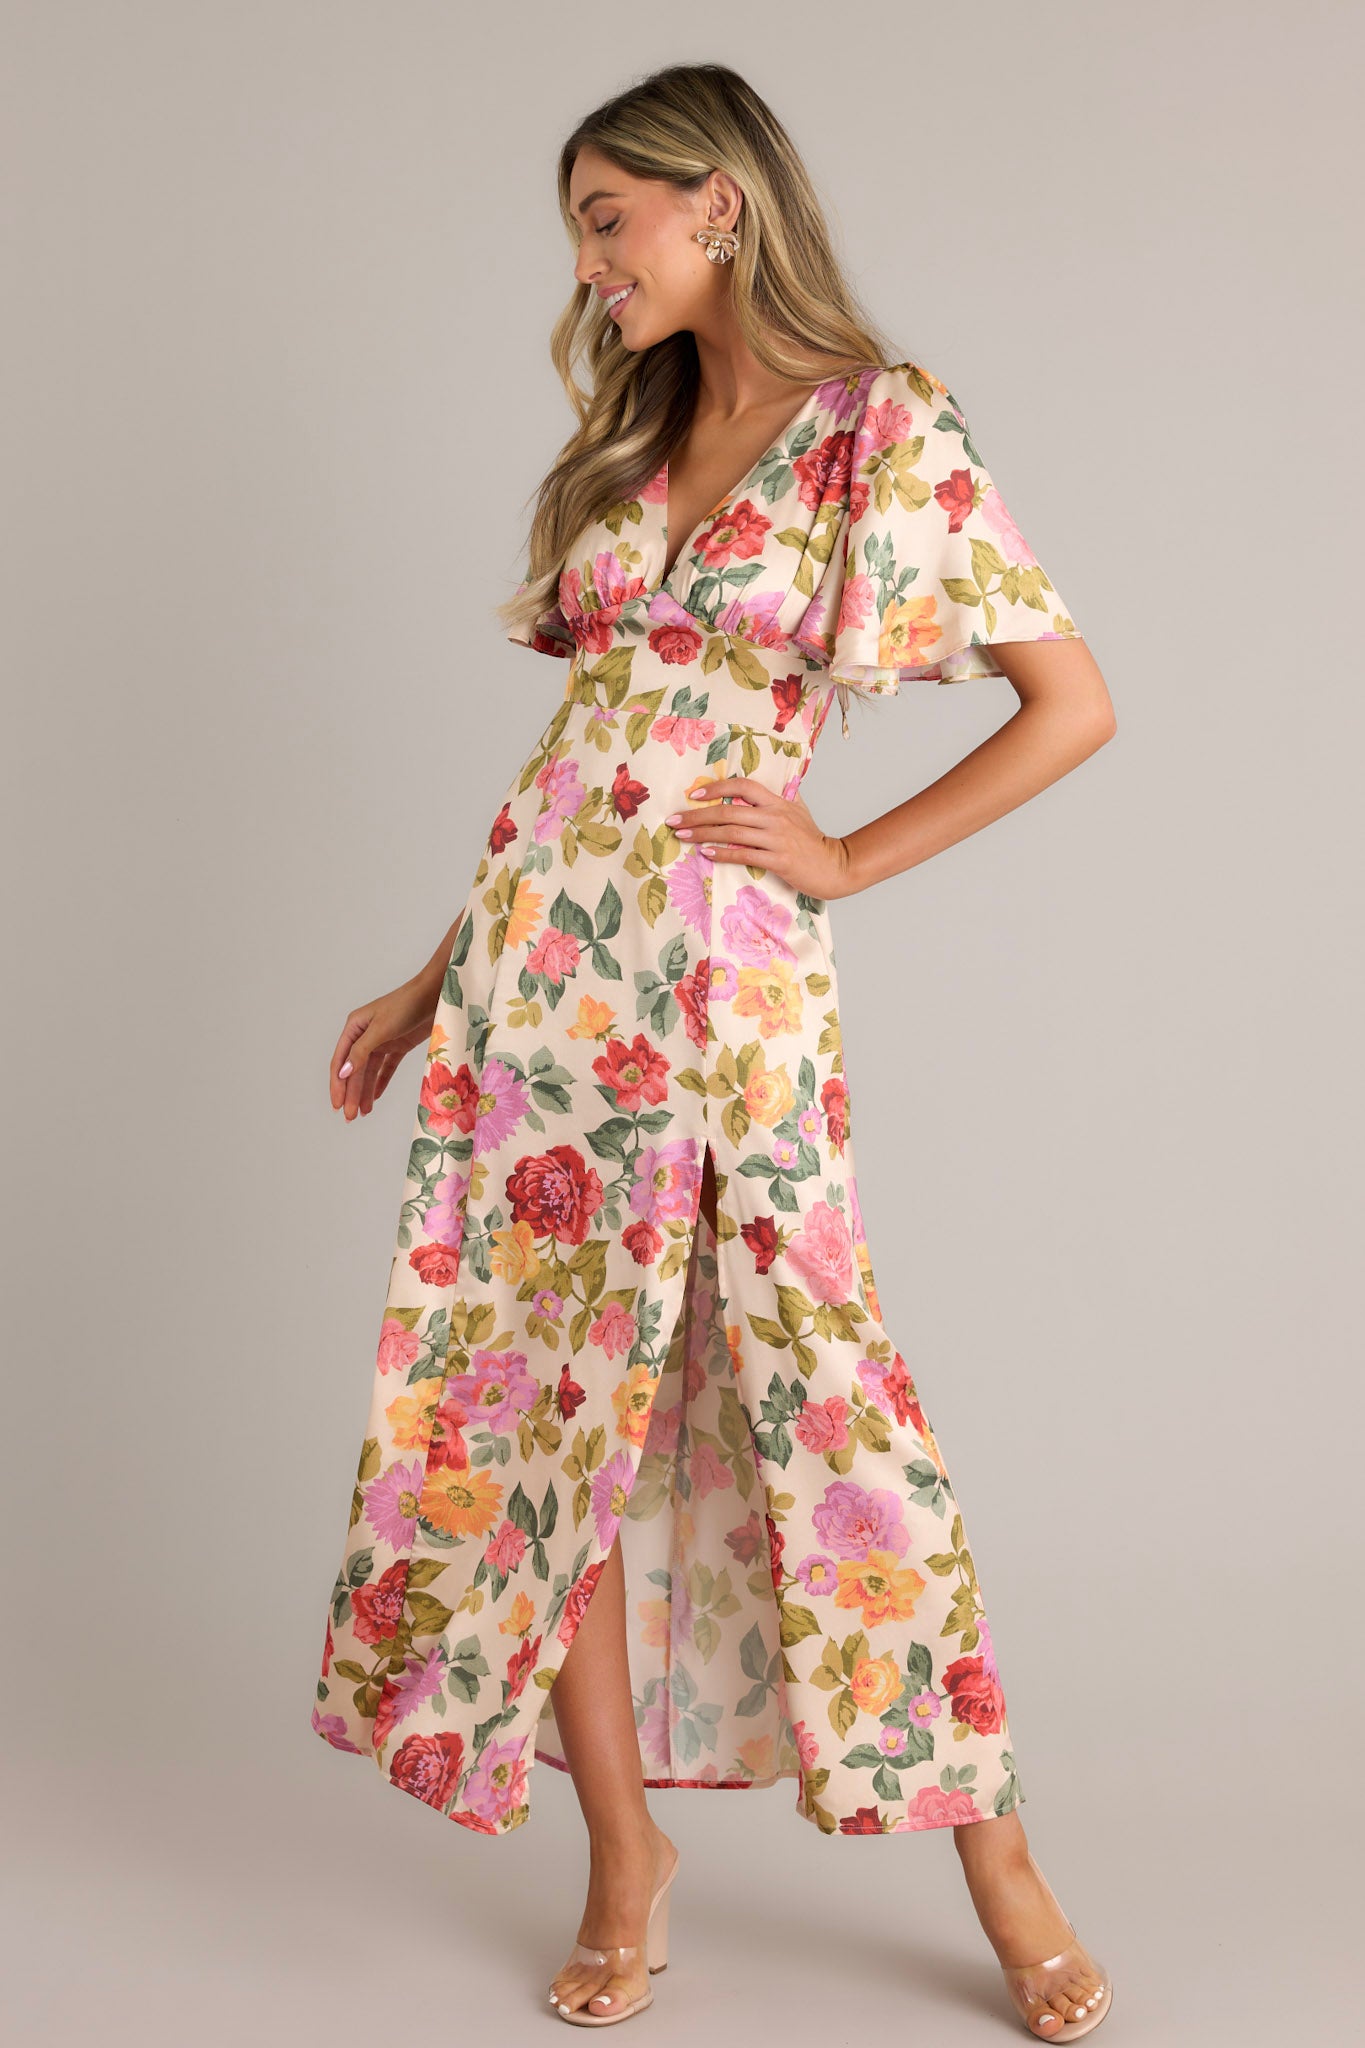 This beige multi floral maxi dress features a deep V-neckline, flutter sleeves, a warm floral print, a fitted waist, an A-line skirt, and a front slit.